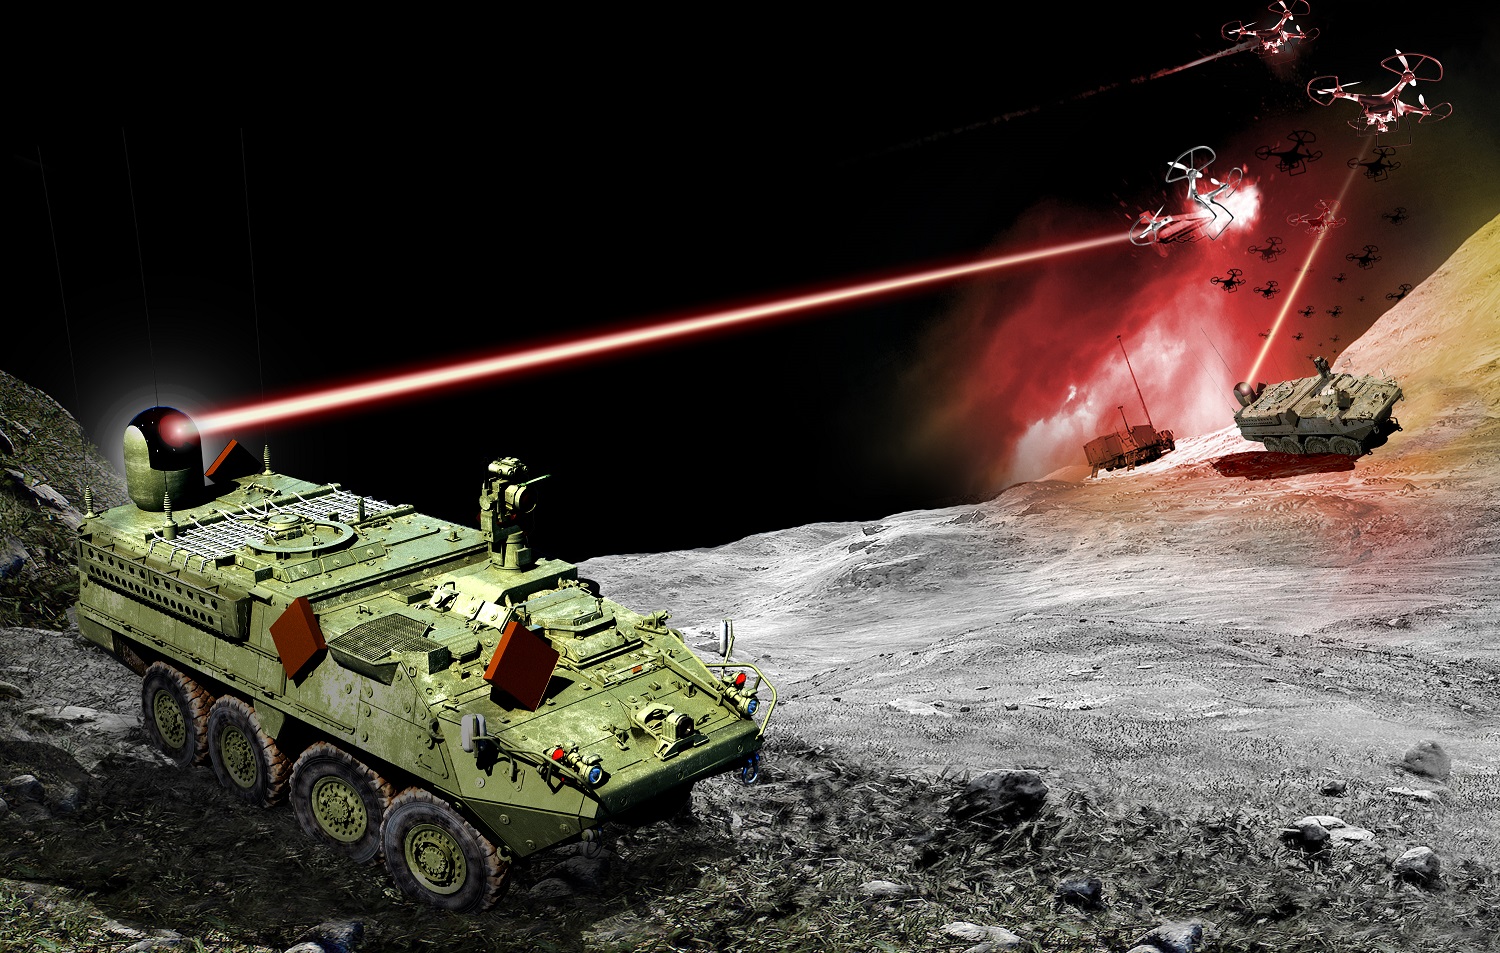 Northrop and Raytheon to Compete Stryker Vehicle High Energy Laser Initiative